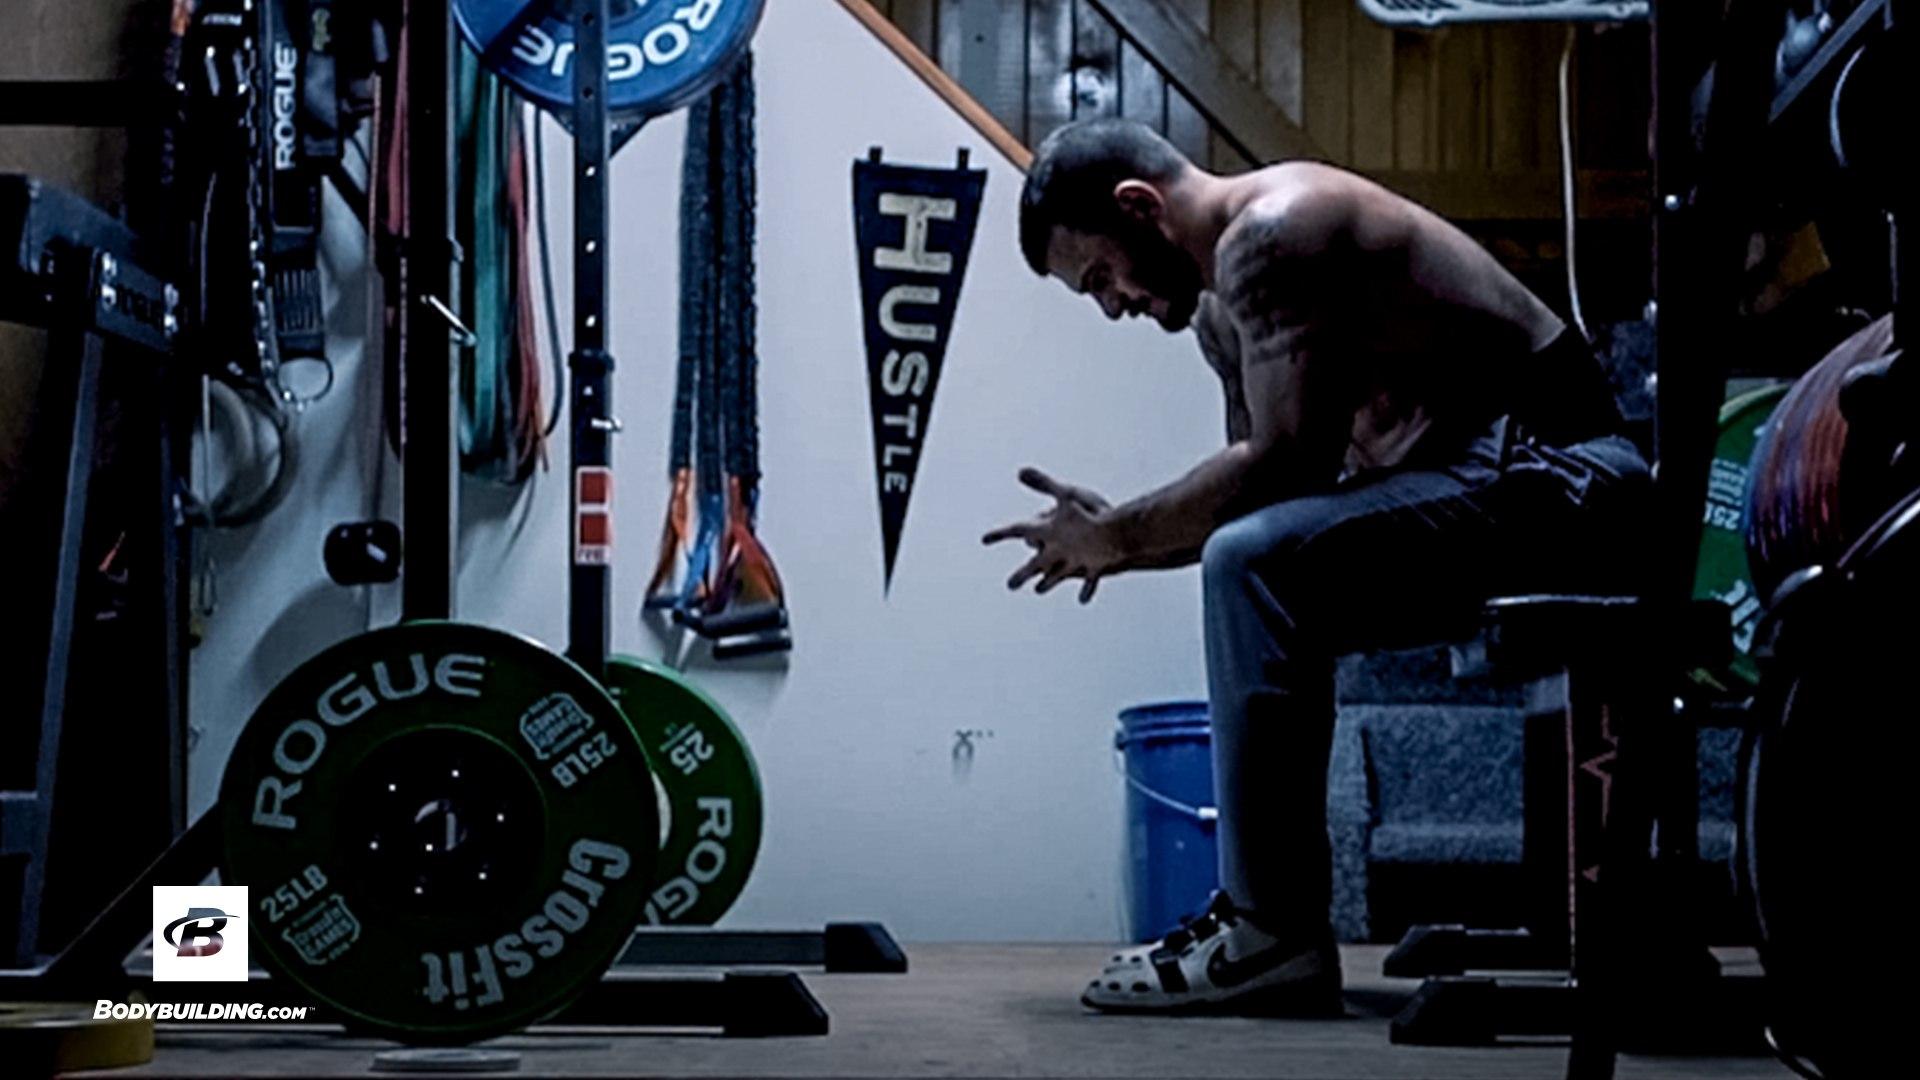 Embracing Fear. Mat Fraser: The Making of a Champion